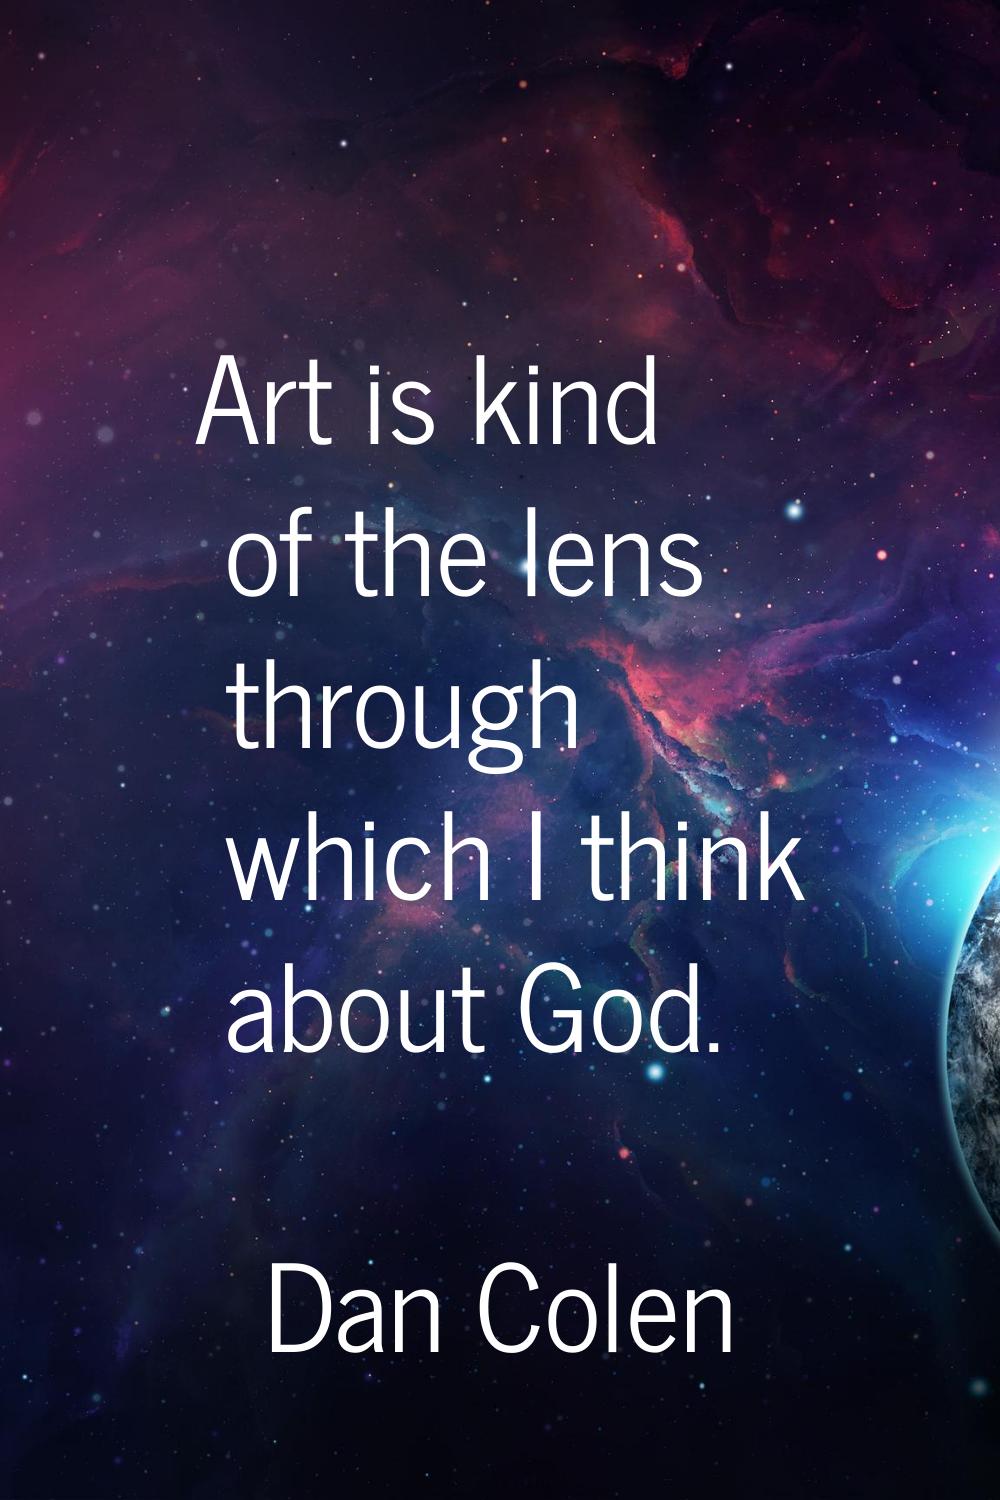 Art is kind of the lens through which I think about God.